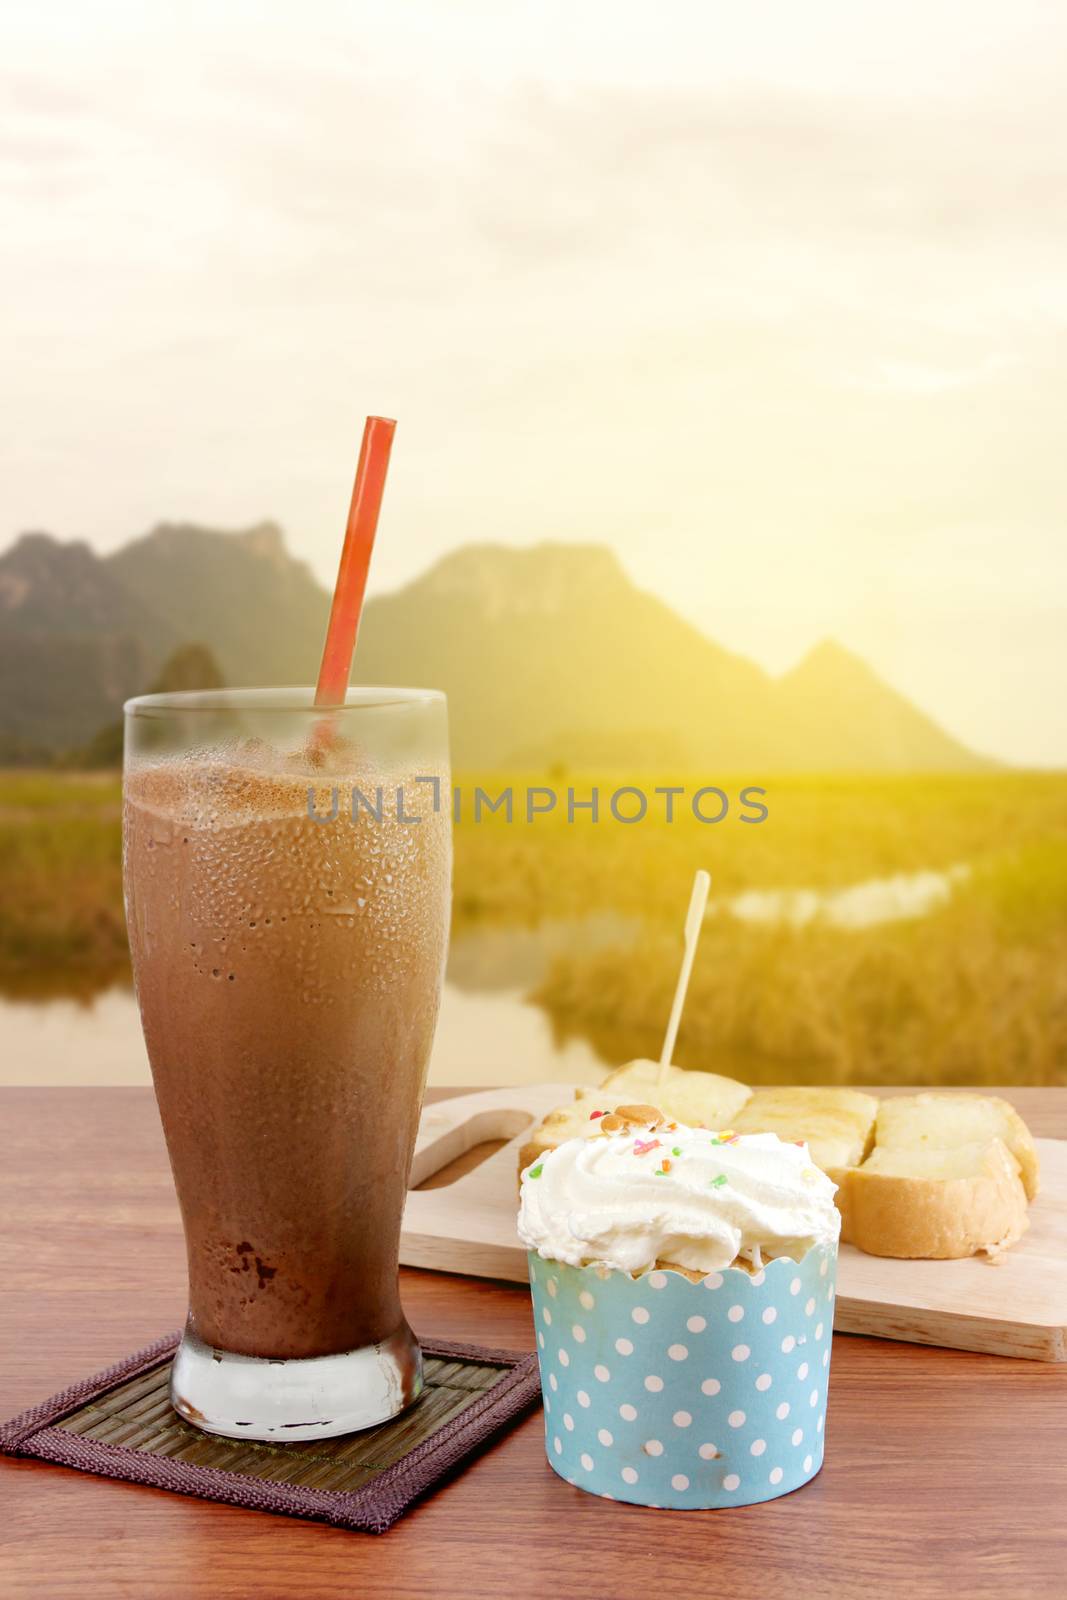 Cocoa chocolate smoothie in glass and Buttered bread and cup cake in morning. Warm lighting.